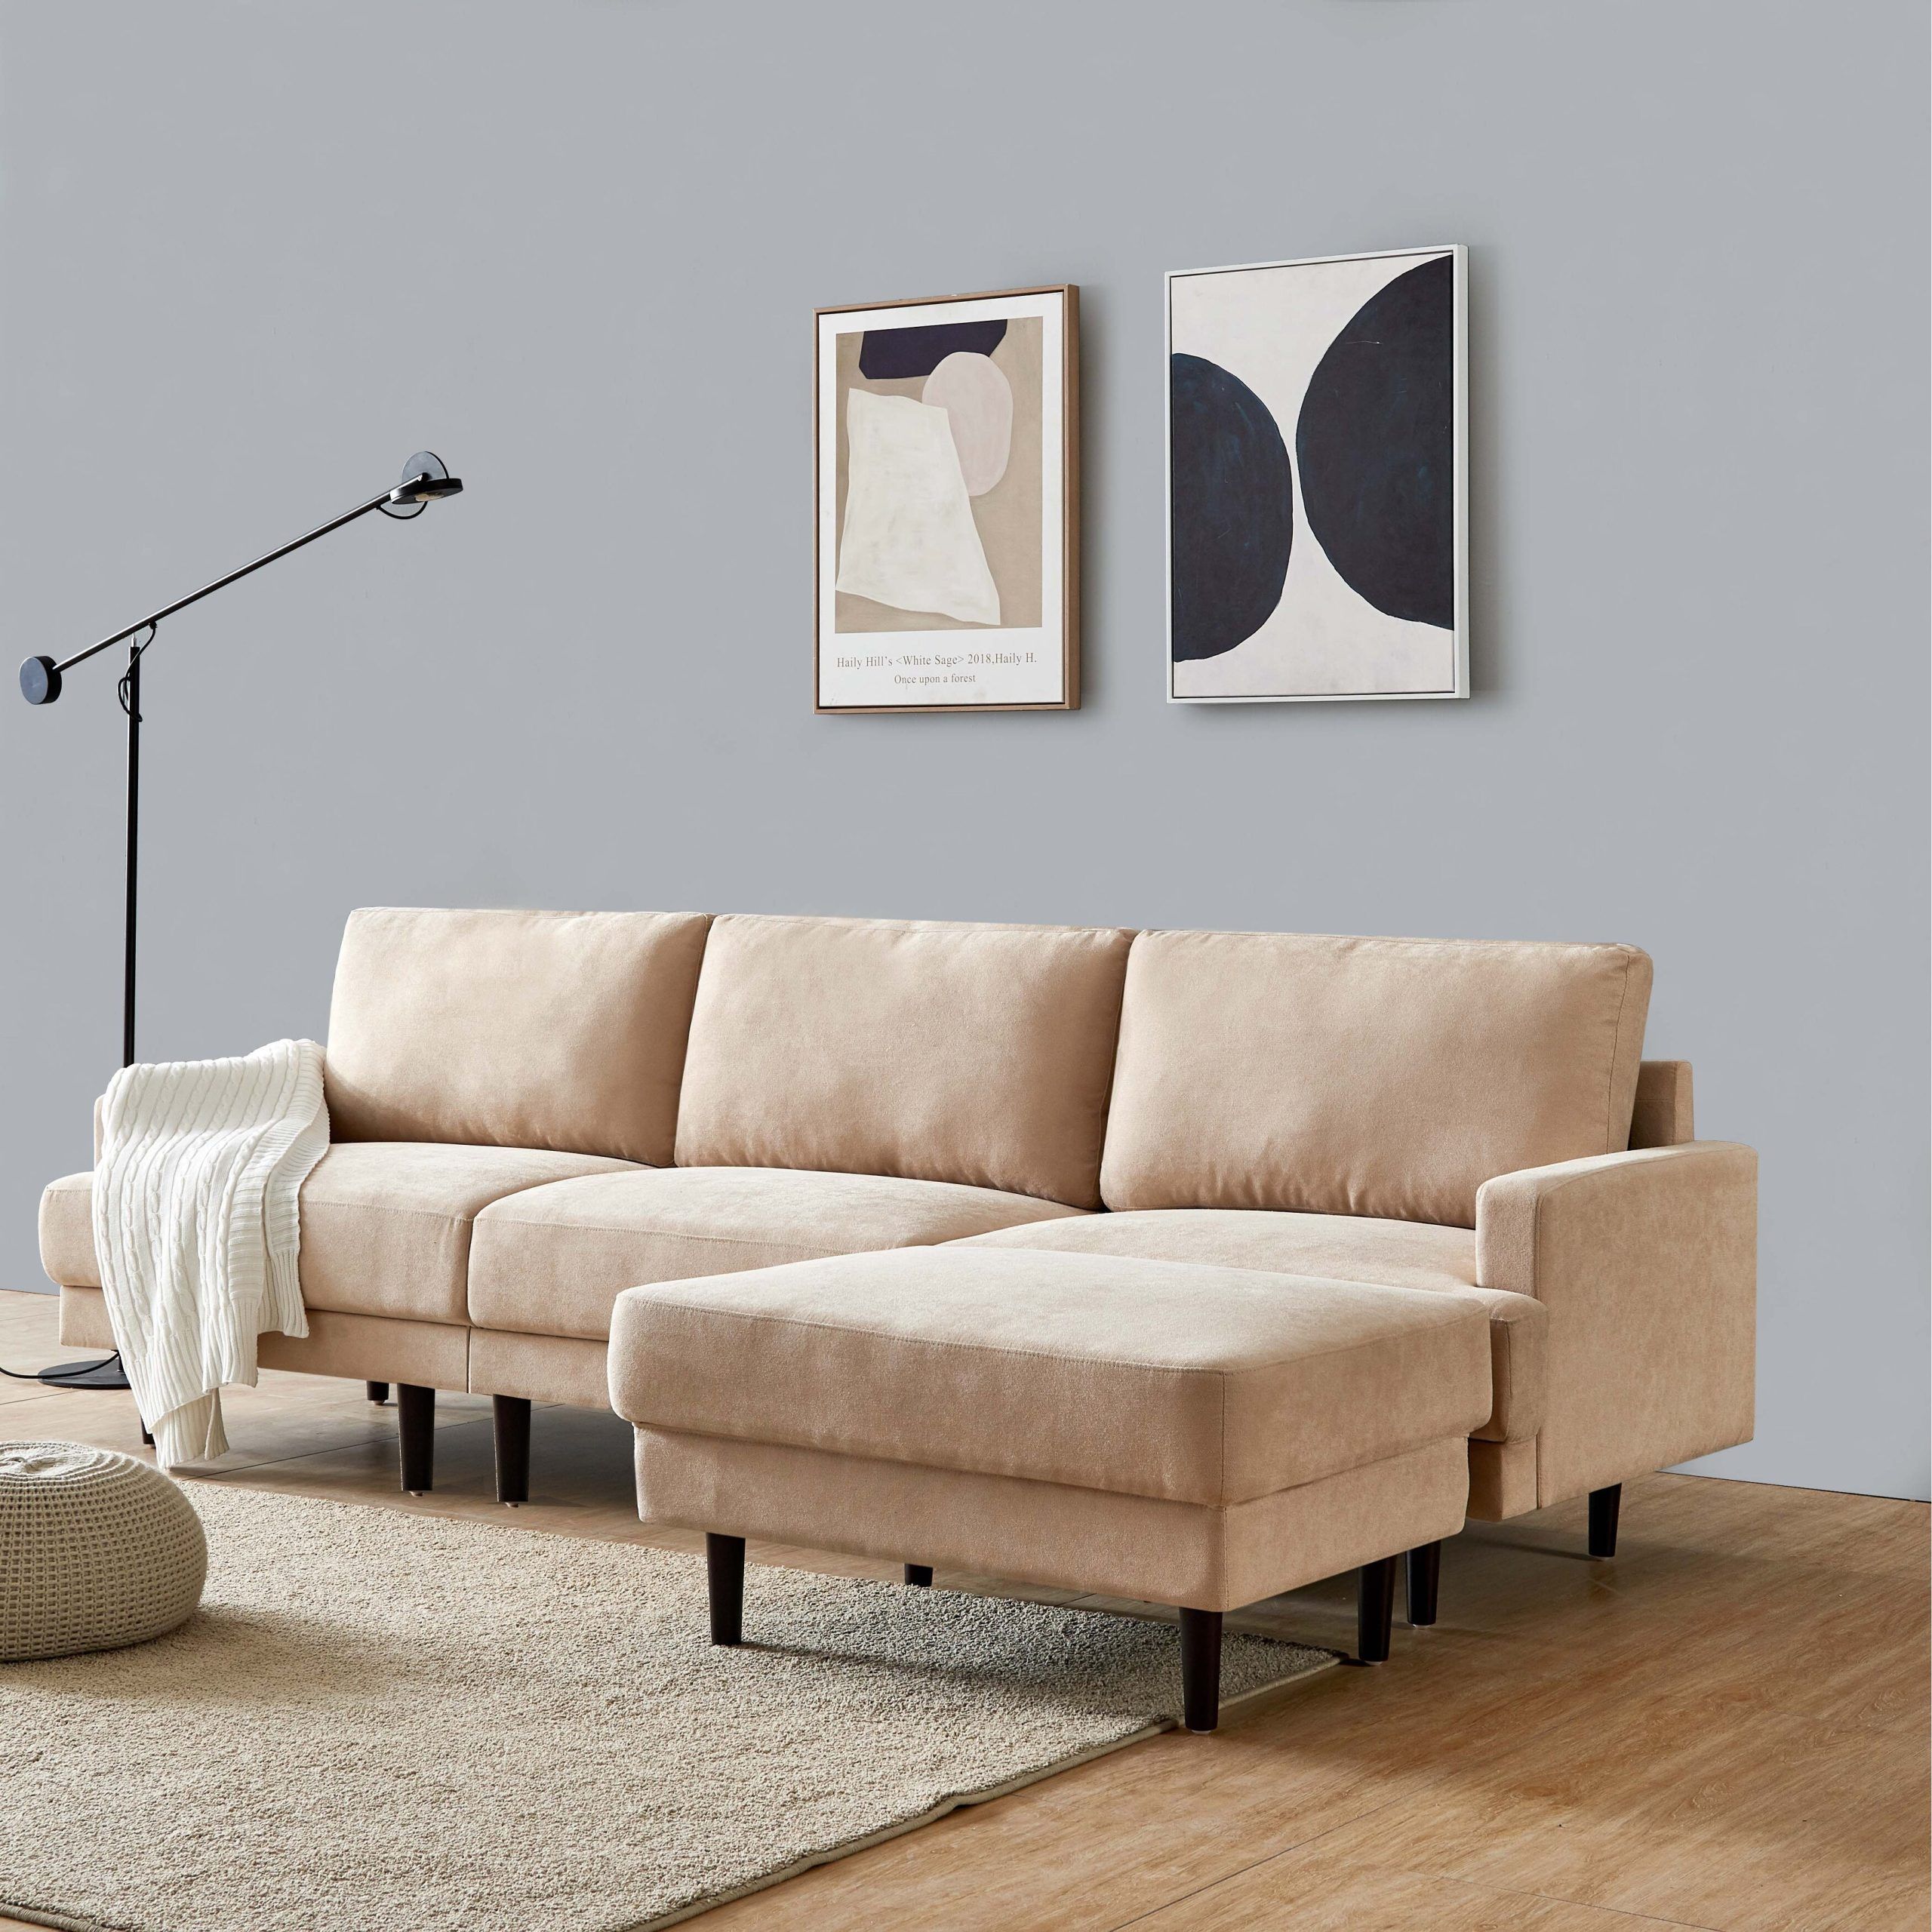 3 Seater Sofas Modern L Shape Fabric Polyester Padded Sofa With Ottoman –  On Sale – Bed Bath & Beyond – 36800064 For Modern 3 Seater Sofas (View 10 of 15)